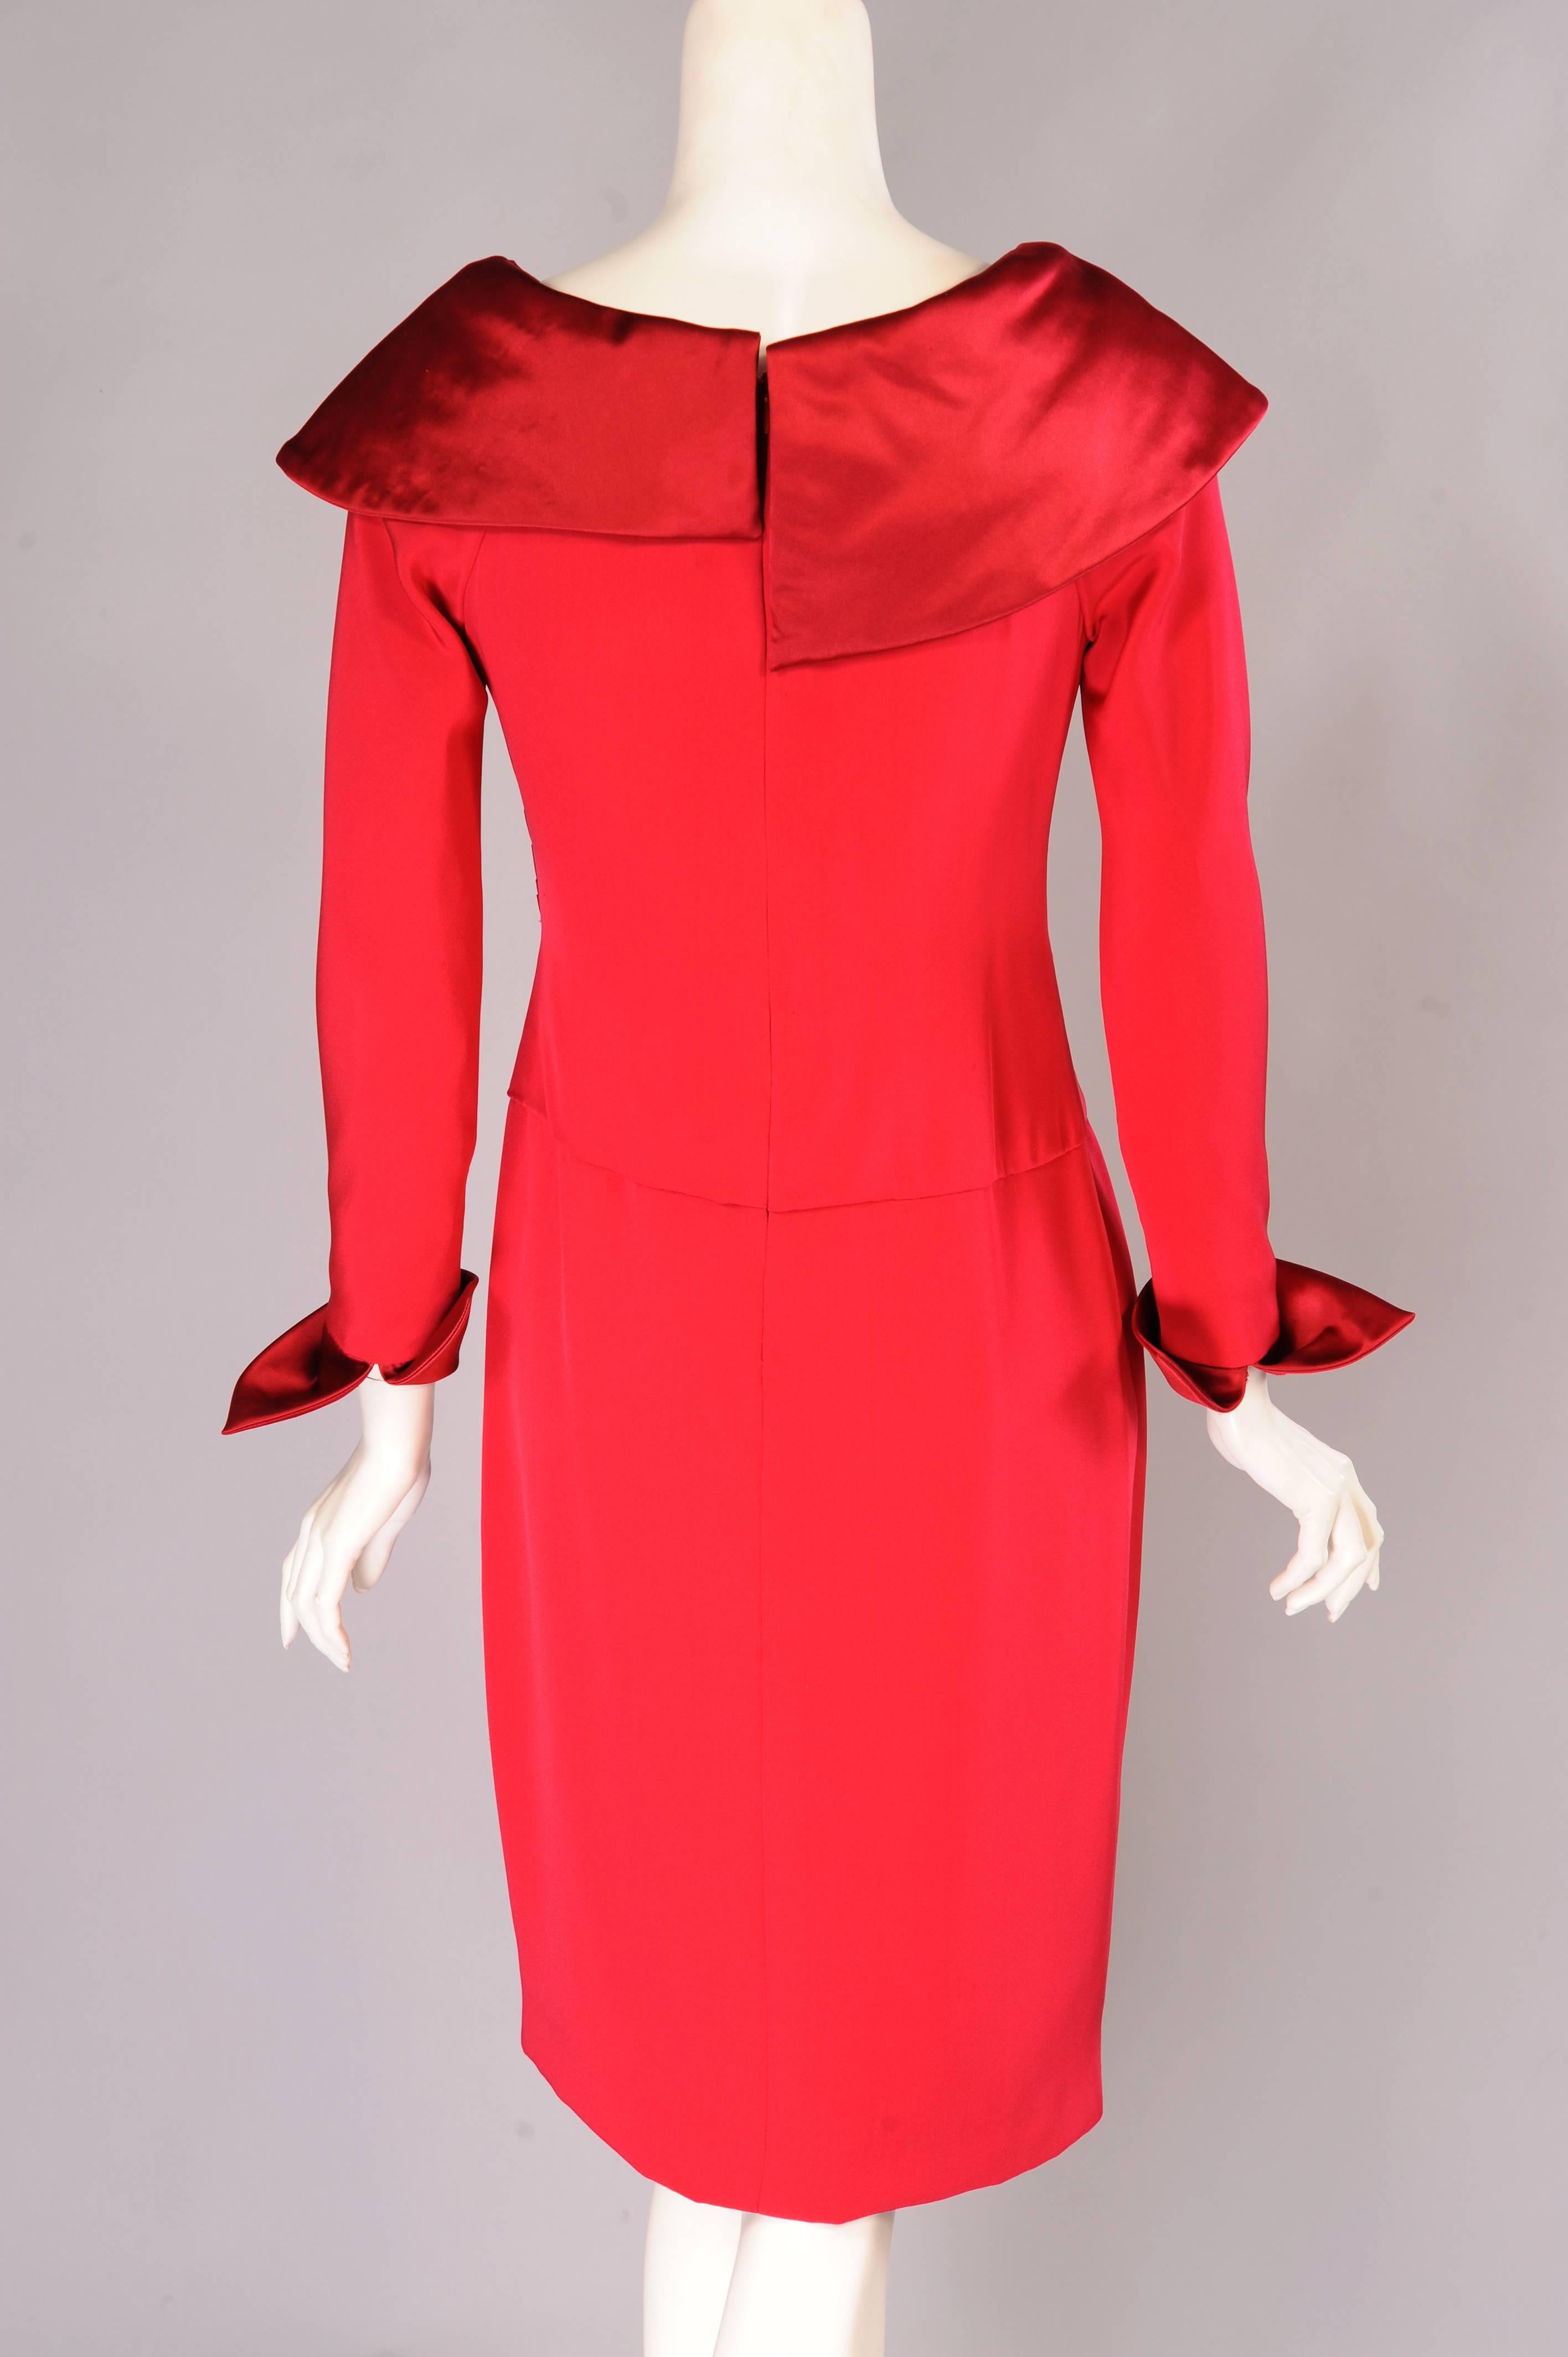 Women's Christian Lacroix Numbered Haute Couture Red Satin & Silk Dress